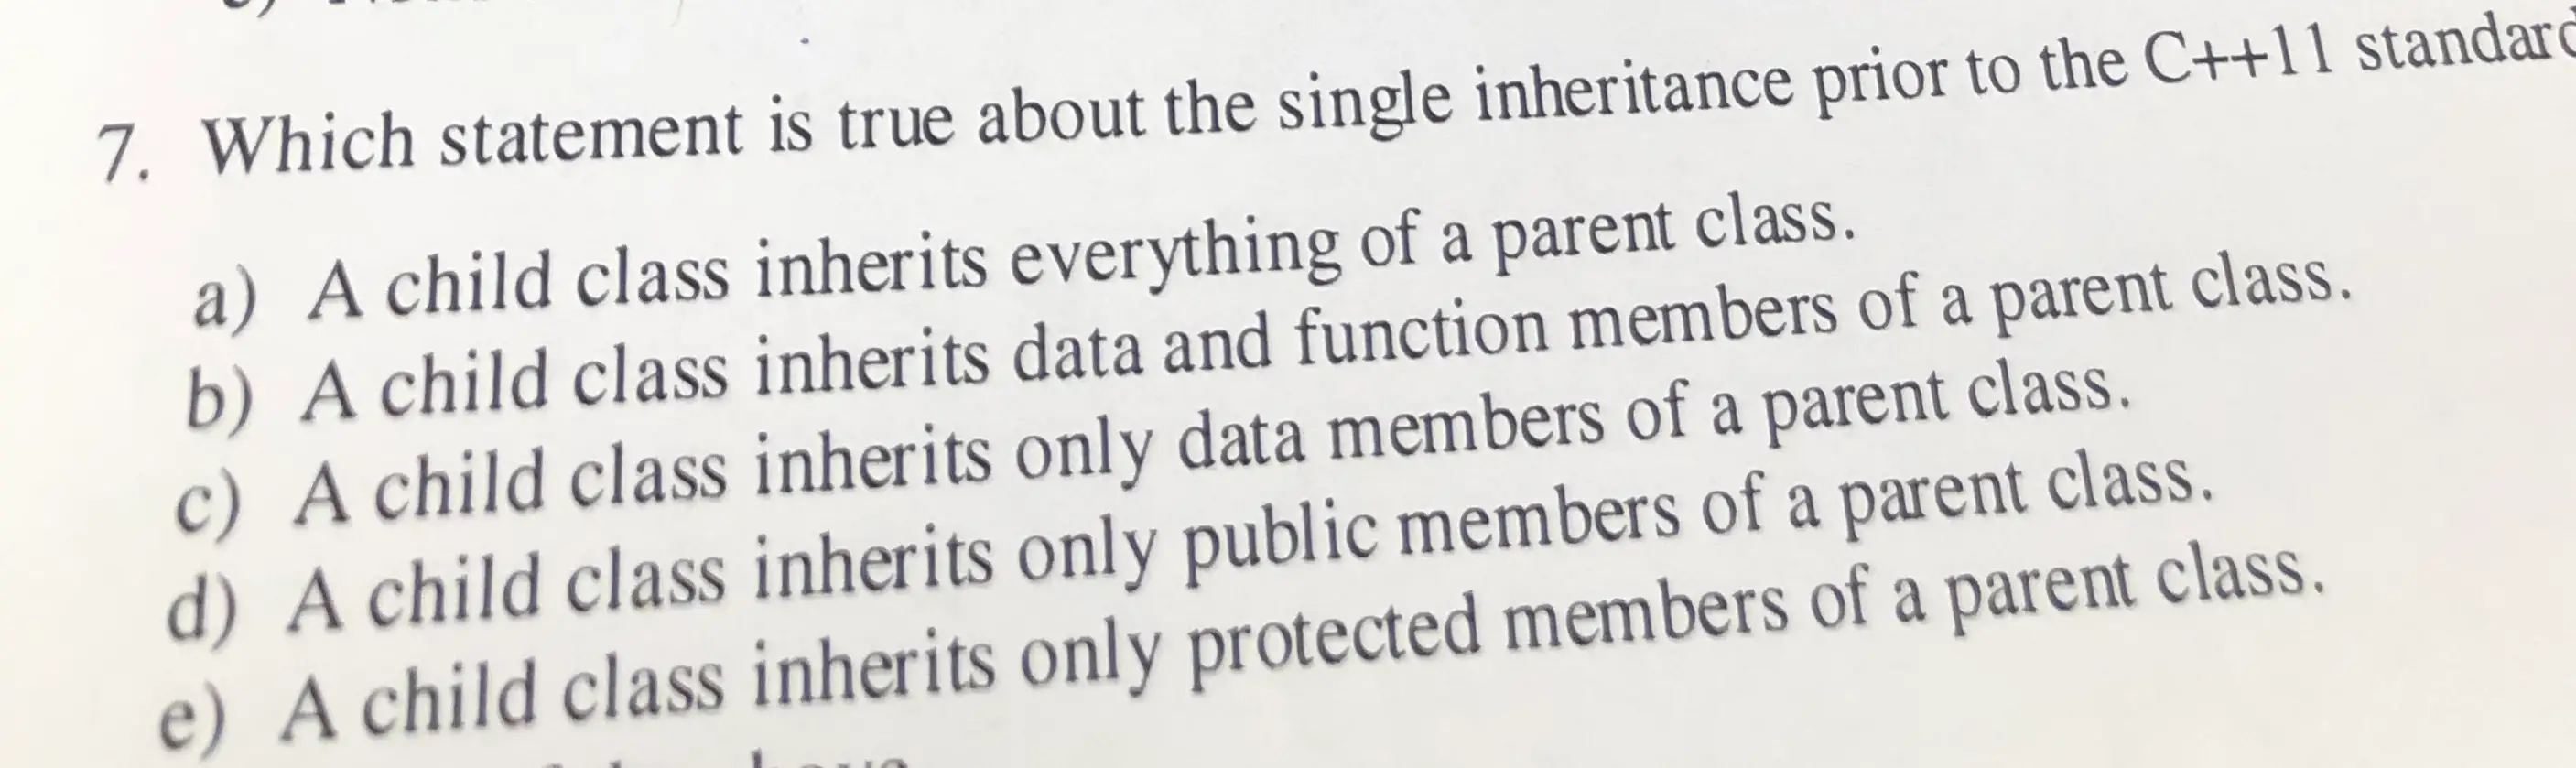 7. Which statement is true about the single inheritance prior to the C++11 standar a) A child class inherits everything of a parent class. b) A child class inherits data and function members of a parent class. c) A child class inherits only data members of a parent class. d) A child class inherits only public members of a parent class, e) A child class inherits only protected members of a parent class,